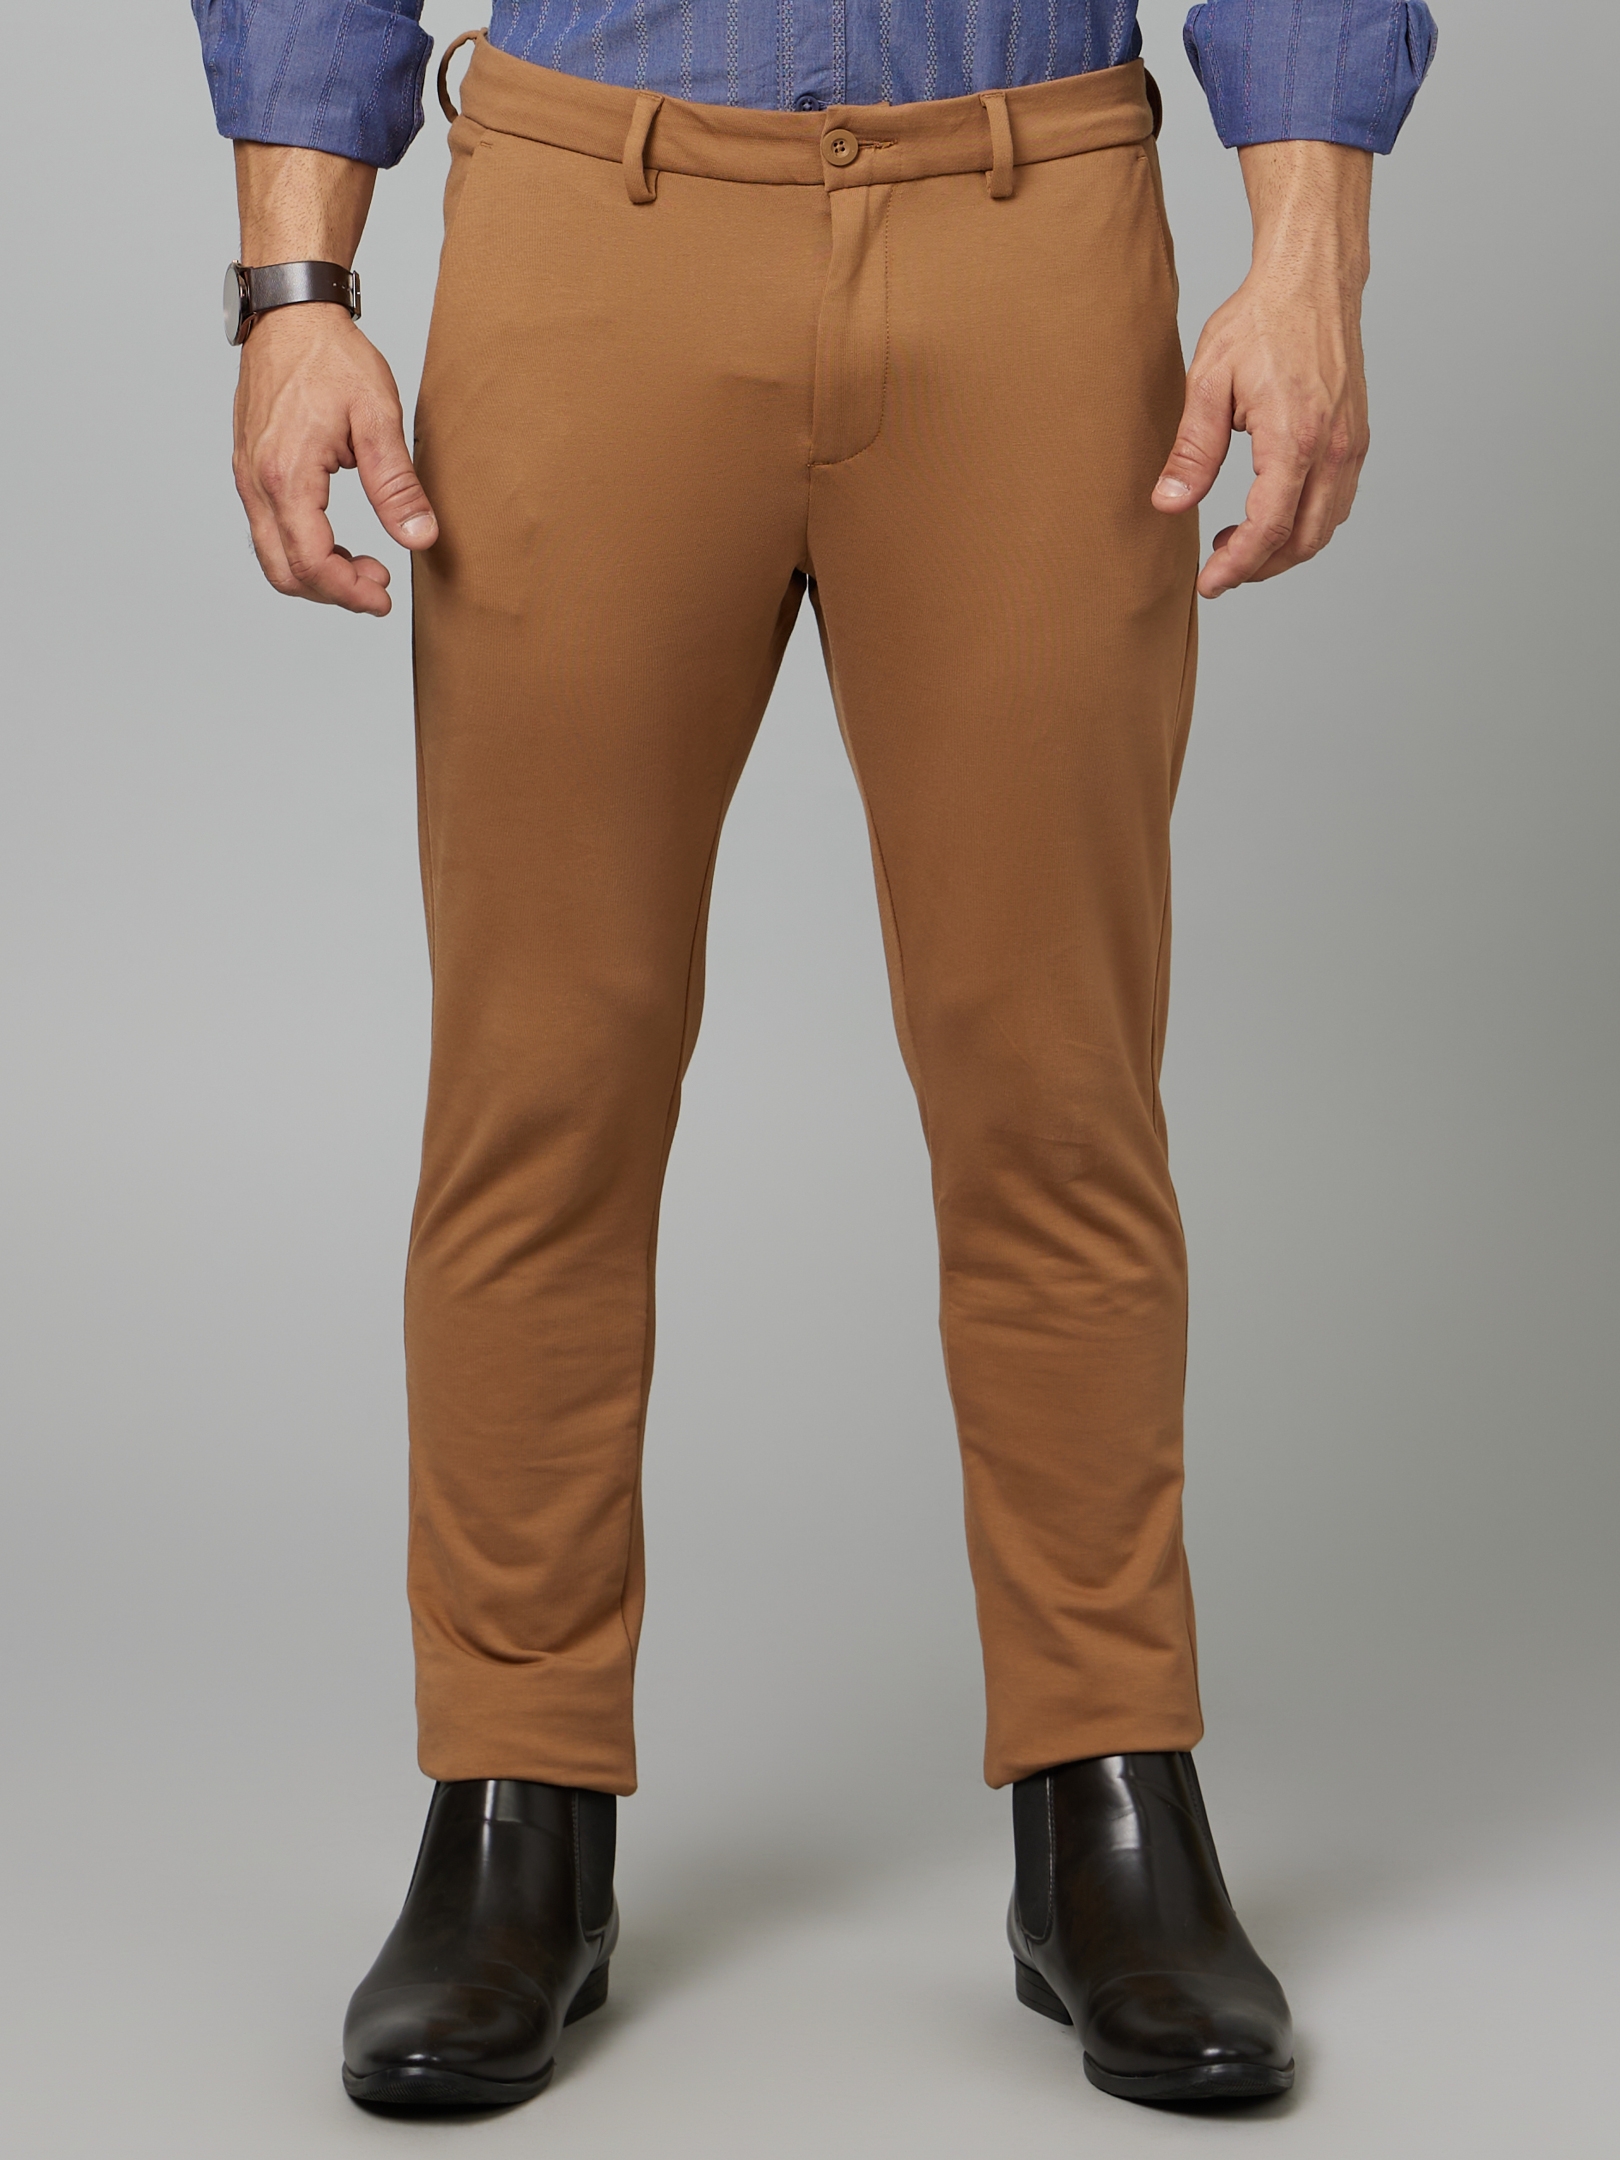 MEN'S COFFEE BROWN SOLID JASON FIT TROUSER – JDC Store Online Shopping